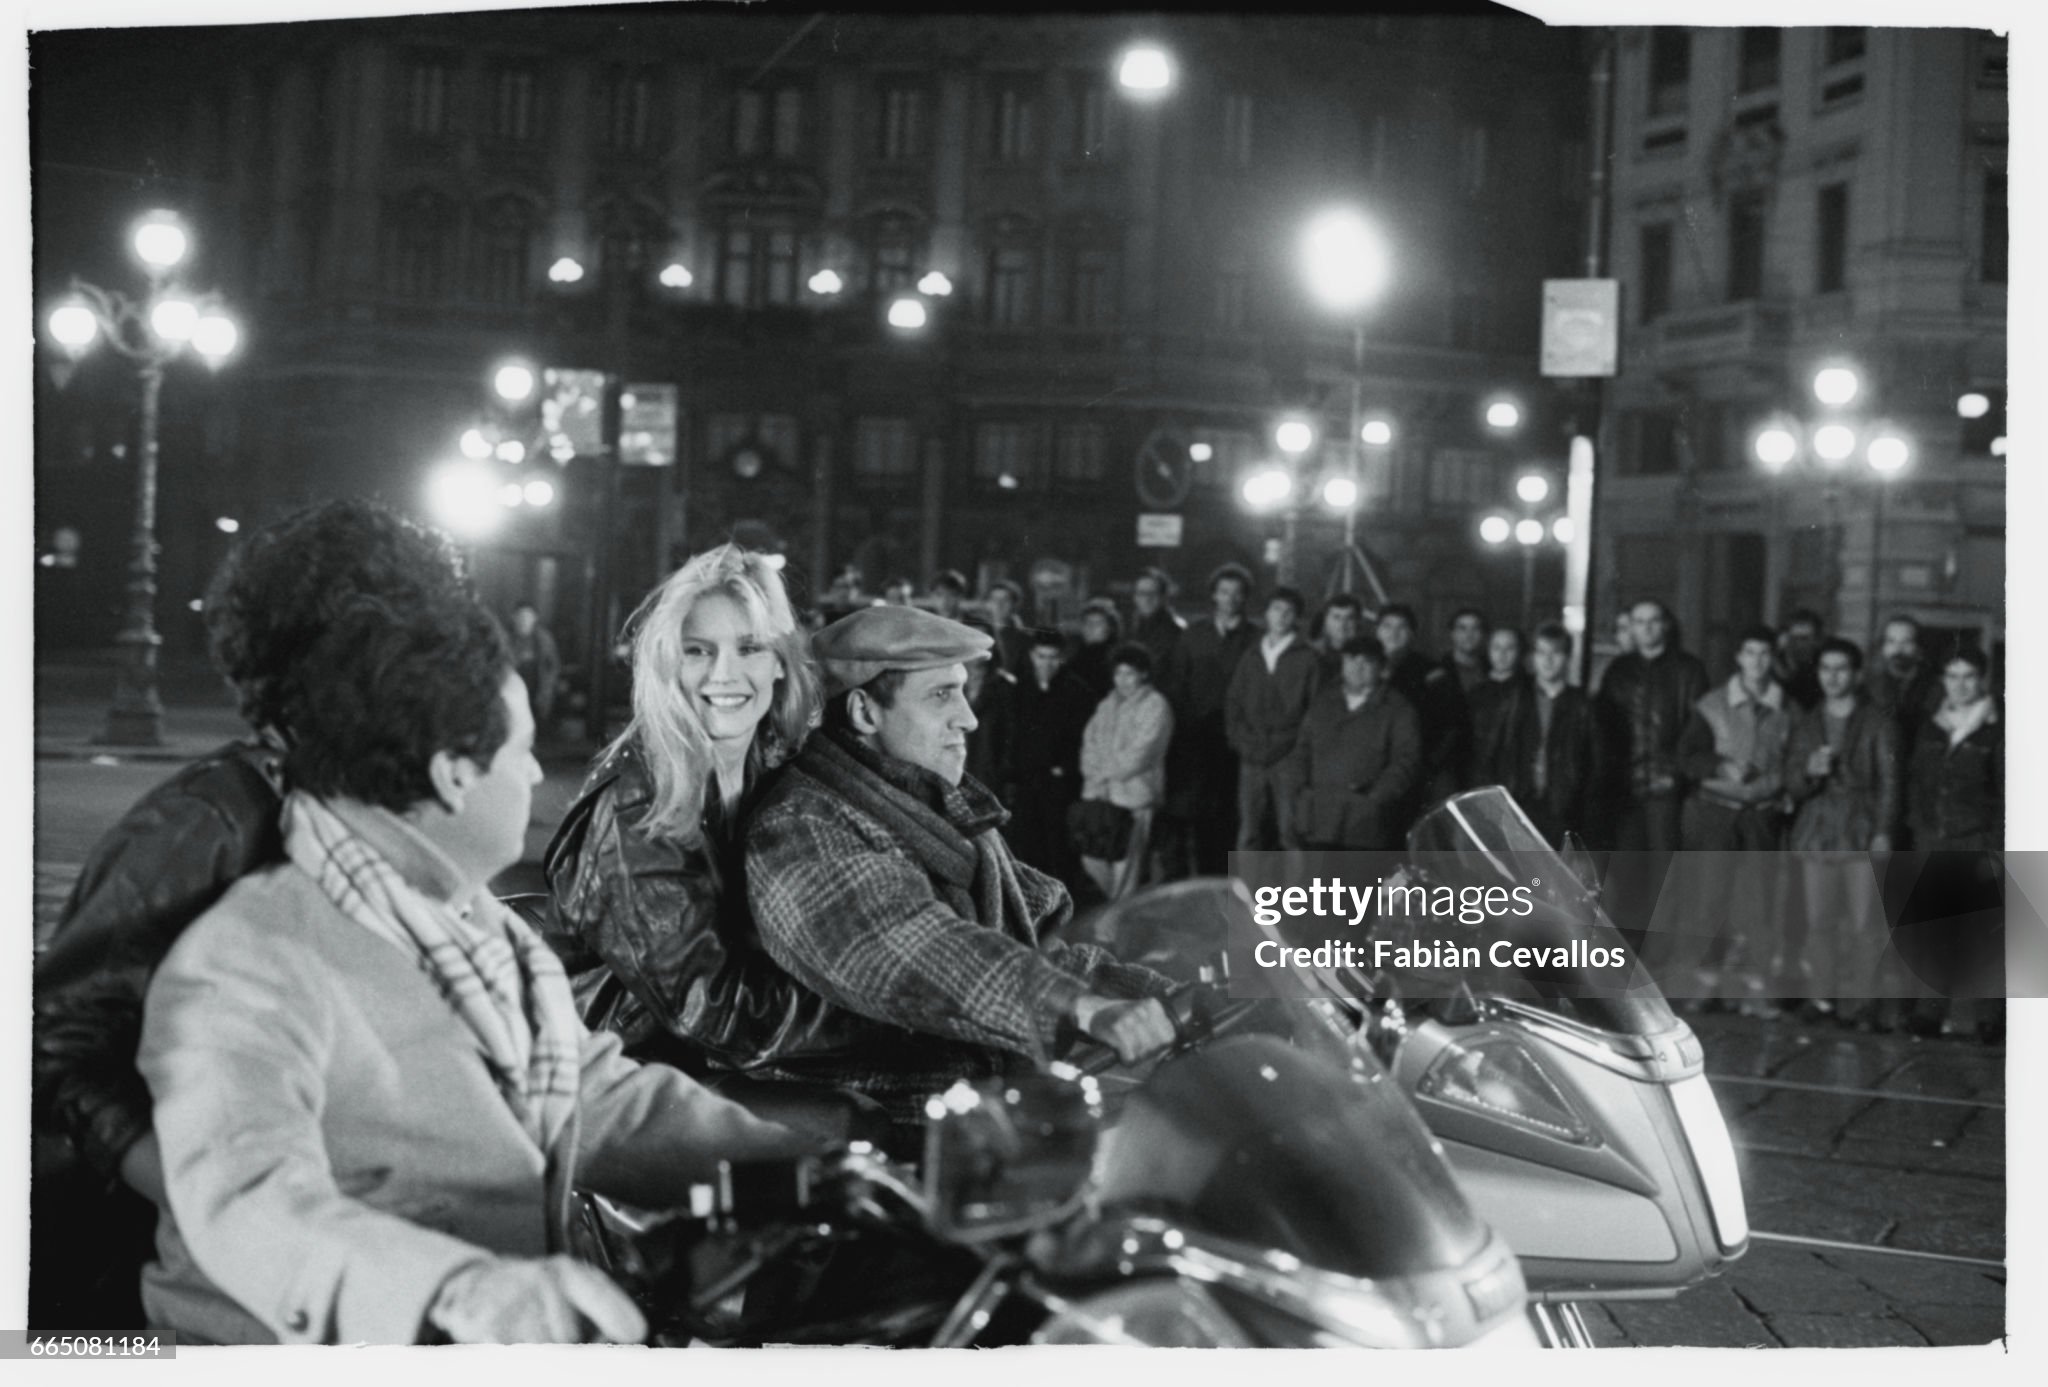 In a scene from the movie ‘Lui e peggio di me’, directed by Enrico Oldoini, actor and singer Adriano Celentano (wearing a cap) and Renato Pozzetto (wearing a scarf) both ride motorcycles with a woman behind them on 01 December 1984. 